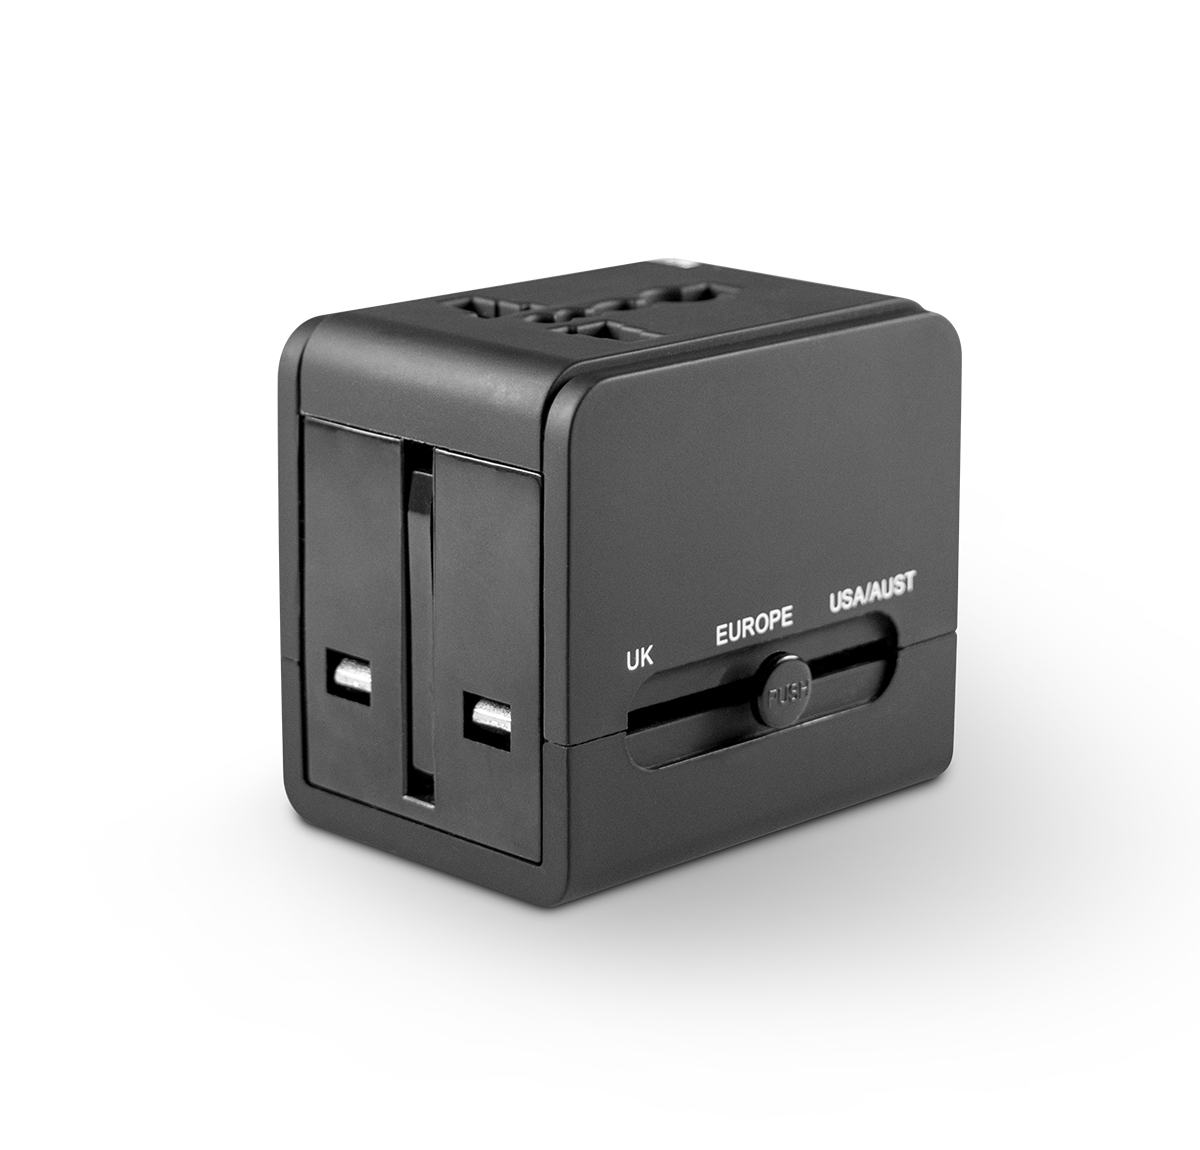 This is a black universal travel adapter. It works in the UK, Europe & USA/Australia. This travel adapter comes with a universal plug adapter for use in over 150 countries.